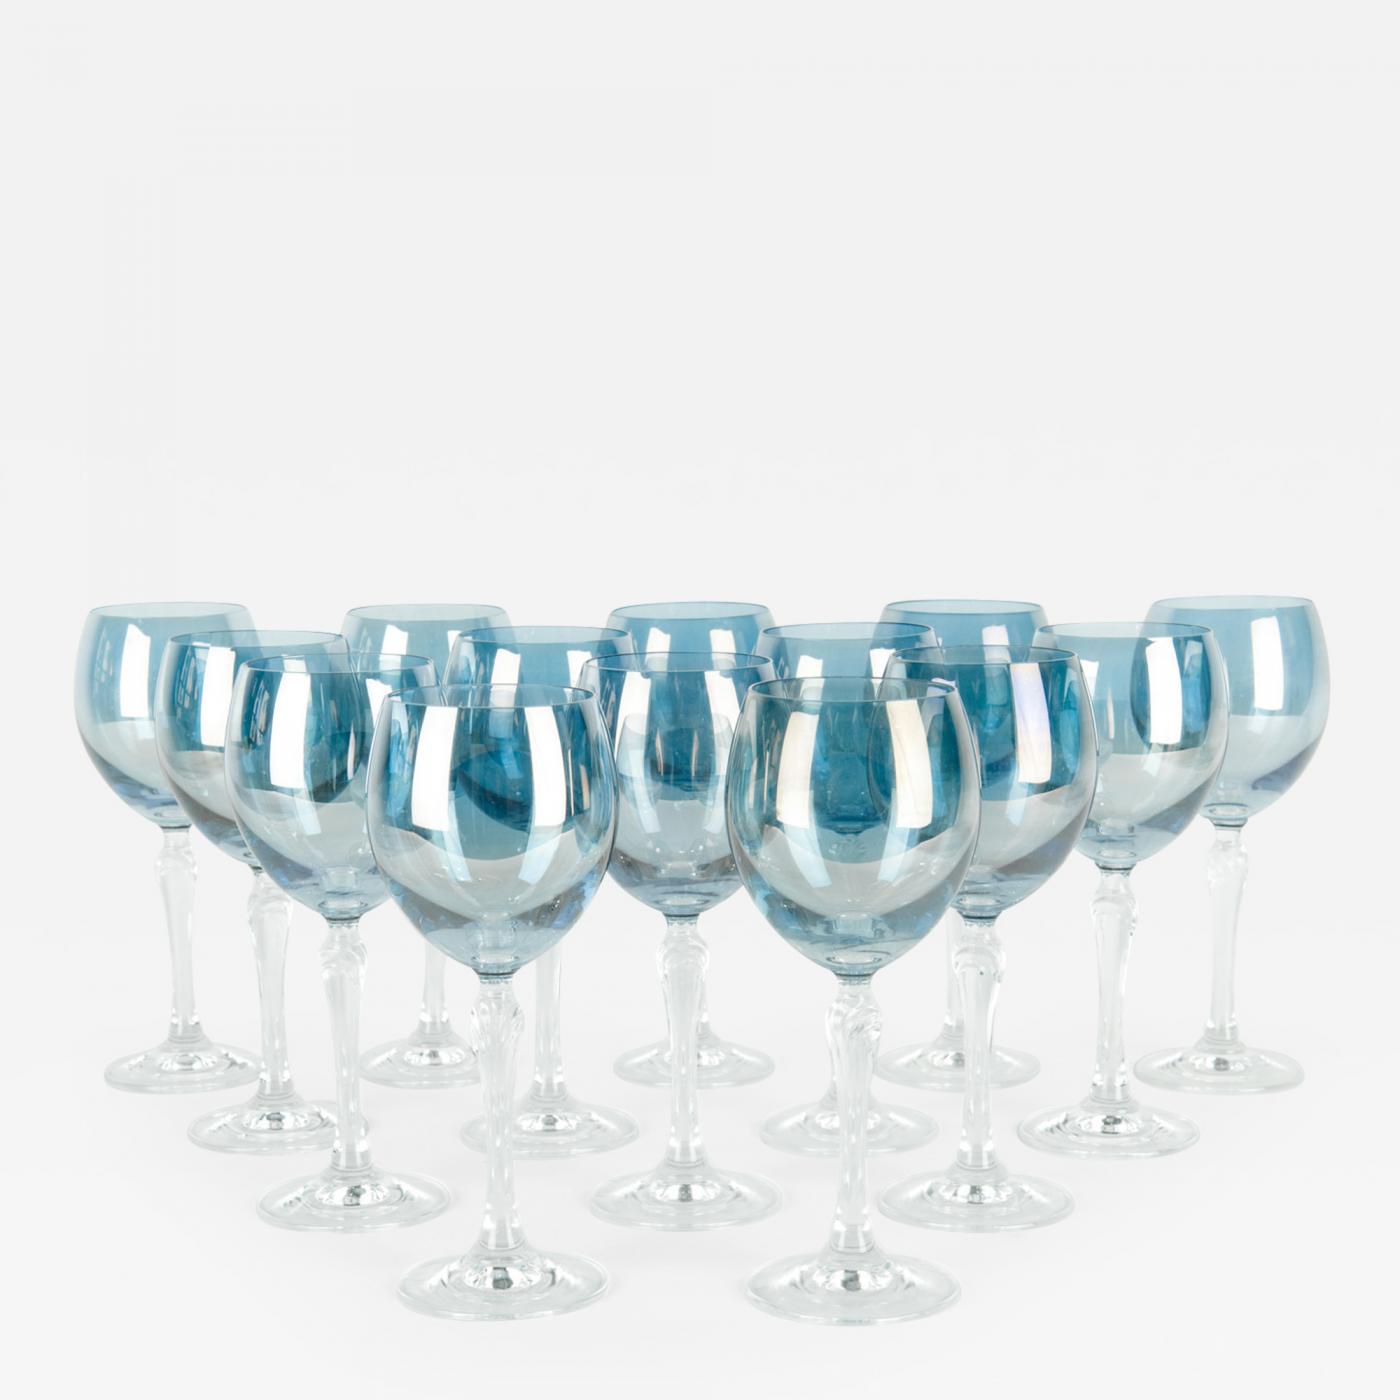 https://cdn.incollect.com/sites/default/files/zoom/Late-20th-Century-Iridescent-Blue-Crystal-Glassware-Set-236962-556995.jpg